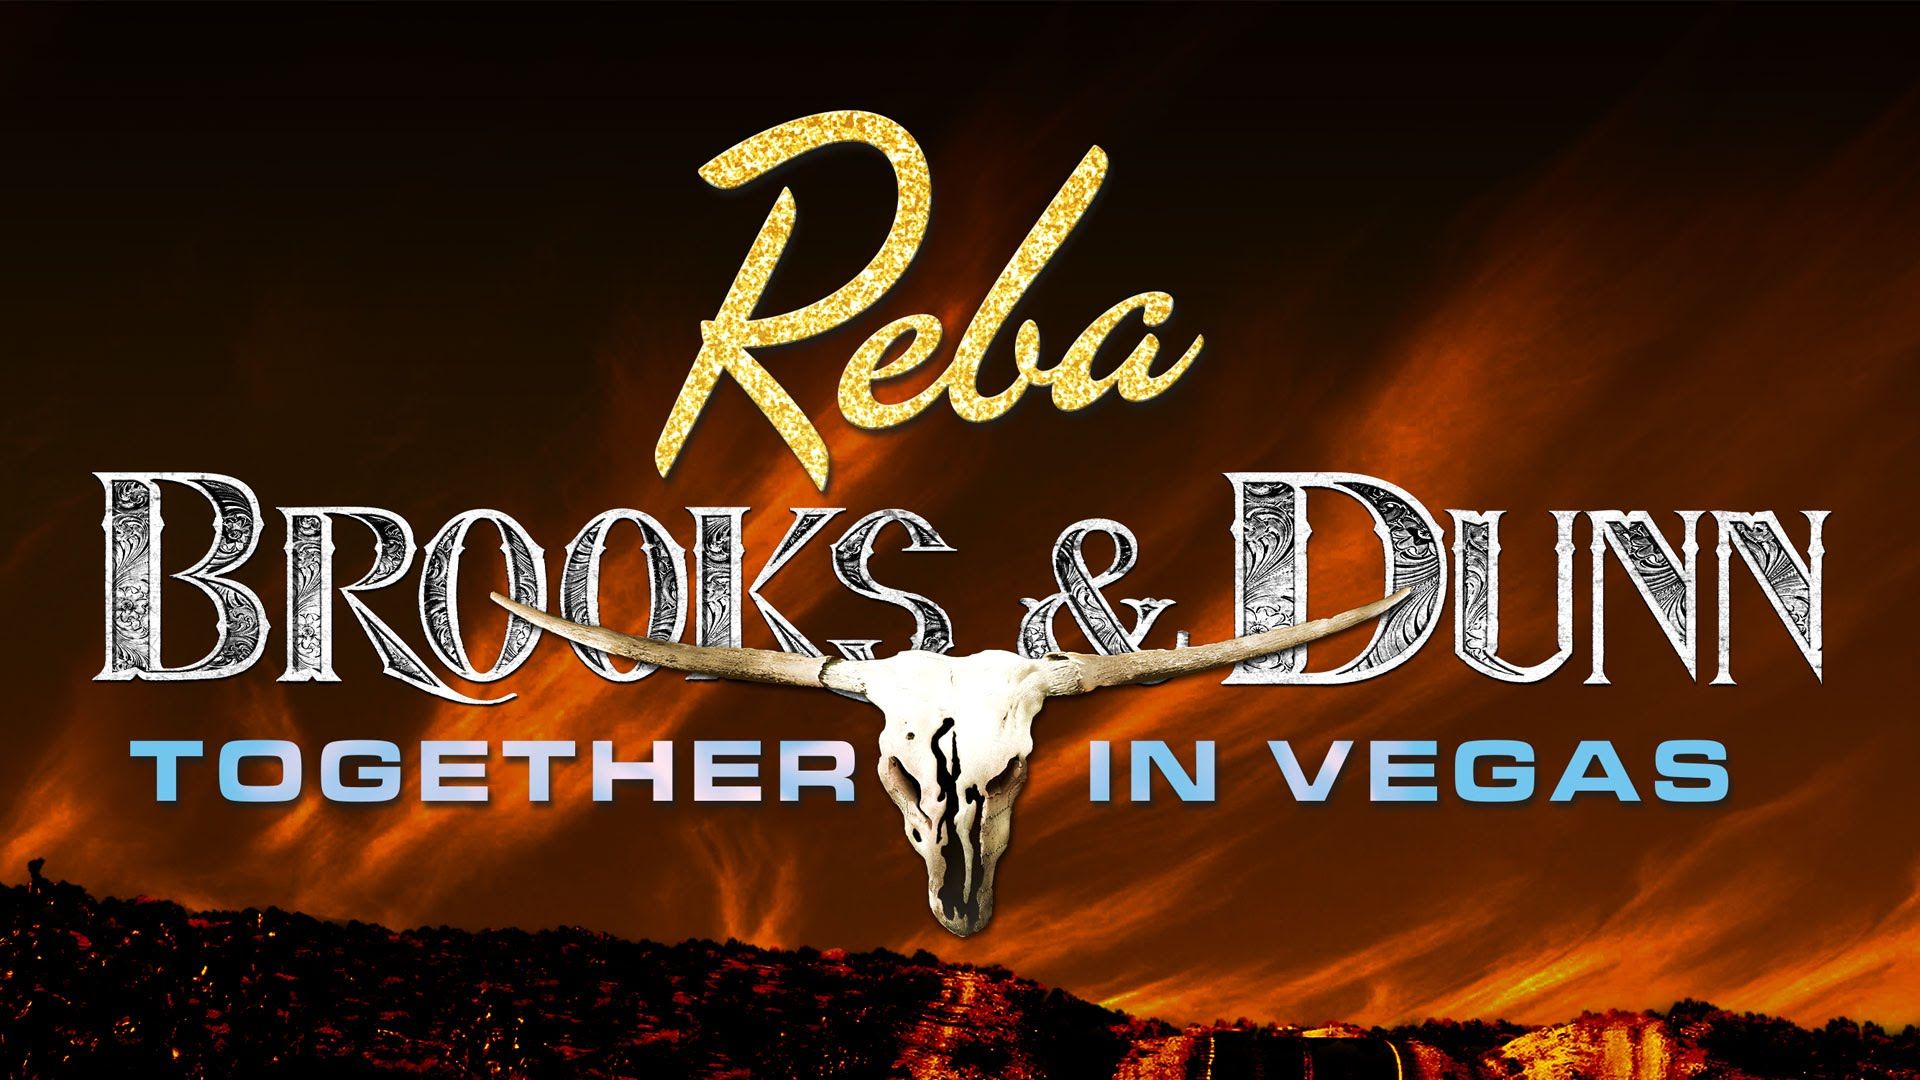 Concert Review: Reba, Brooks & Dunn: Together in Vegas